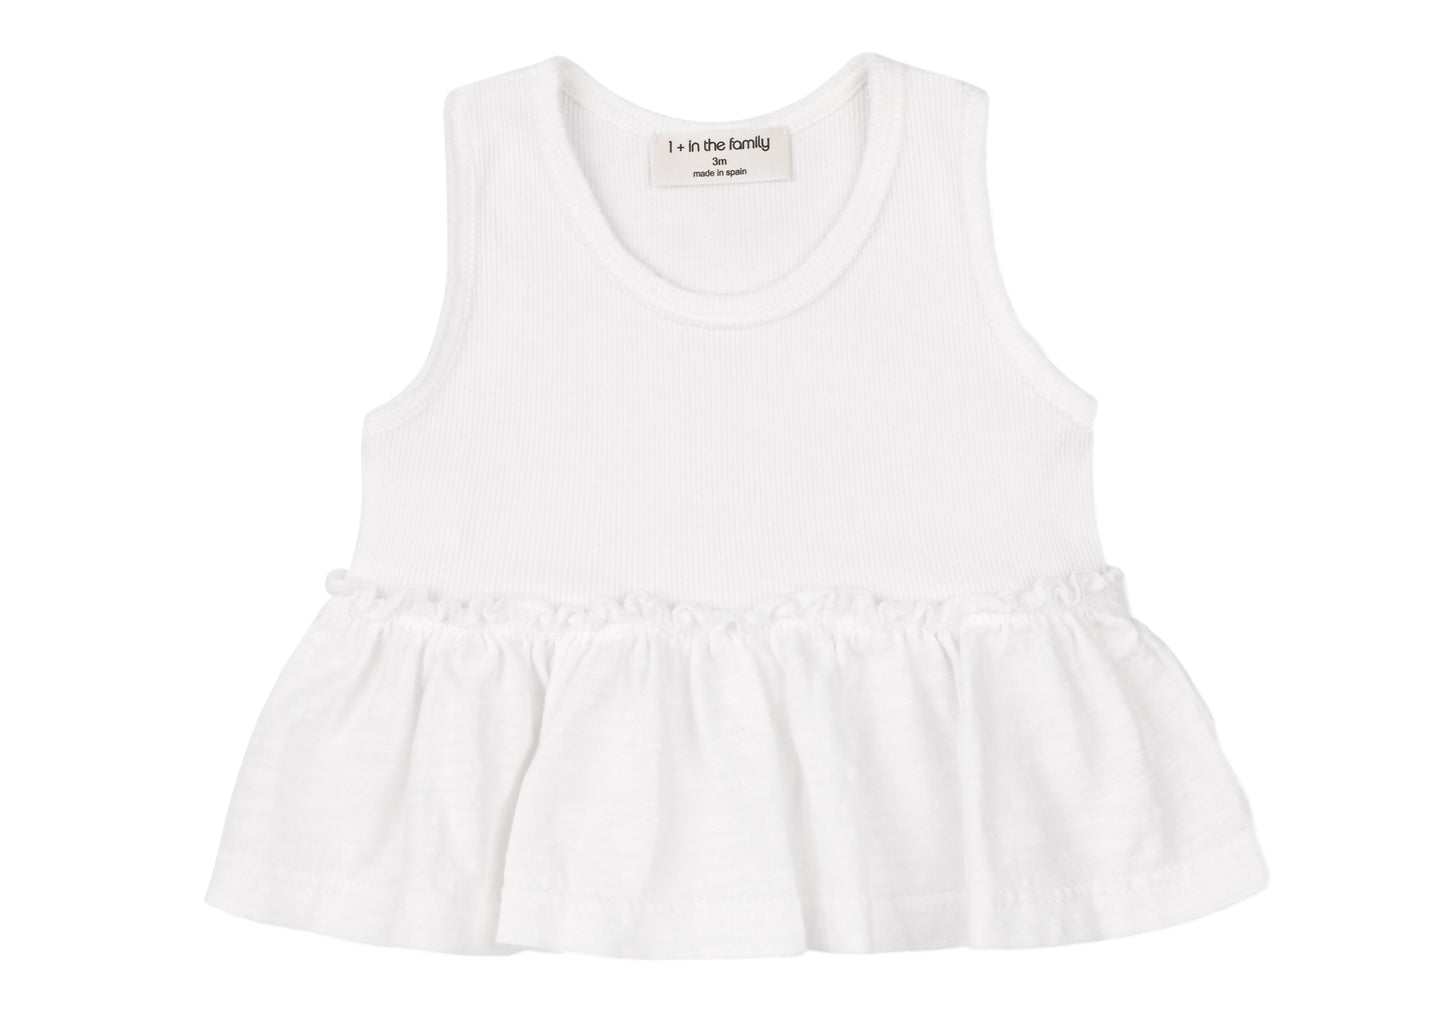 One + In the Family Baby Girl Leuca & Calais Outfit Set